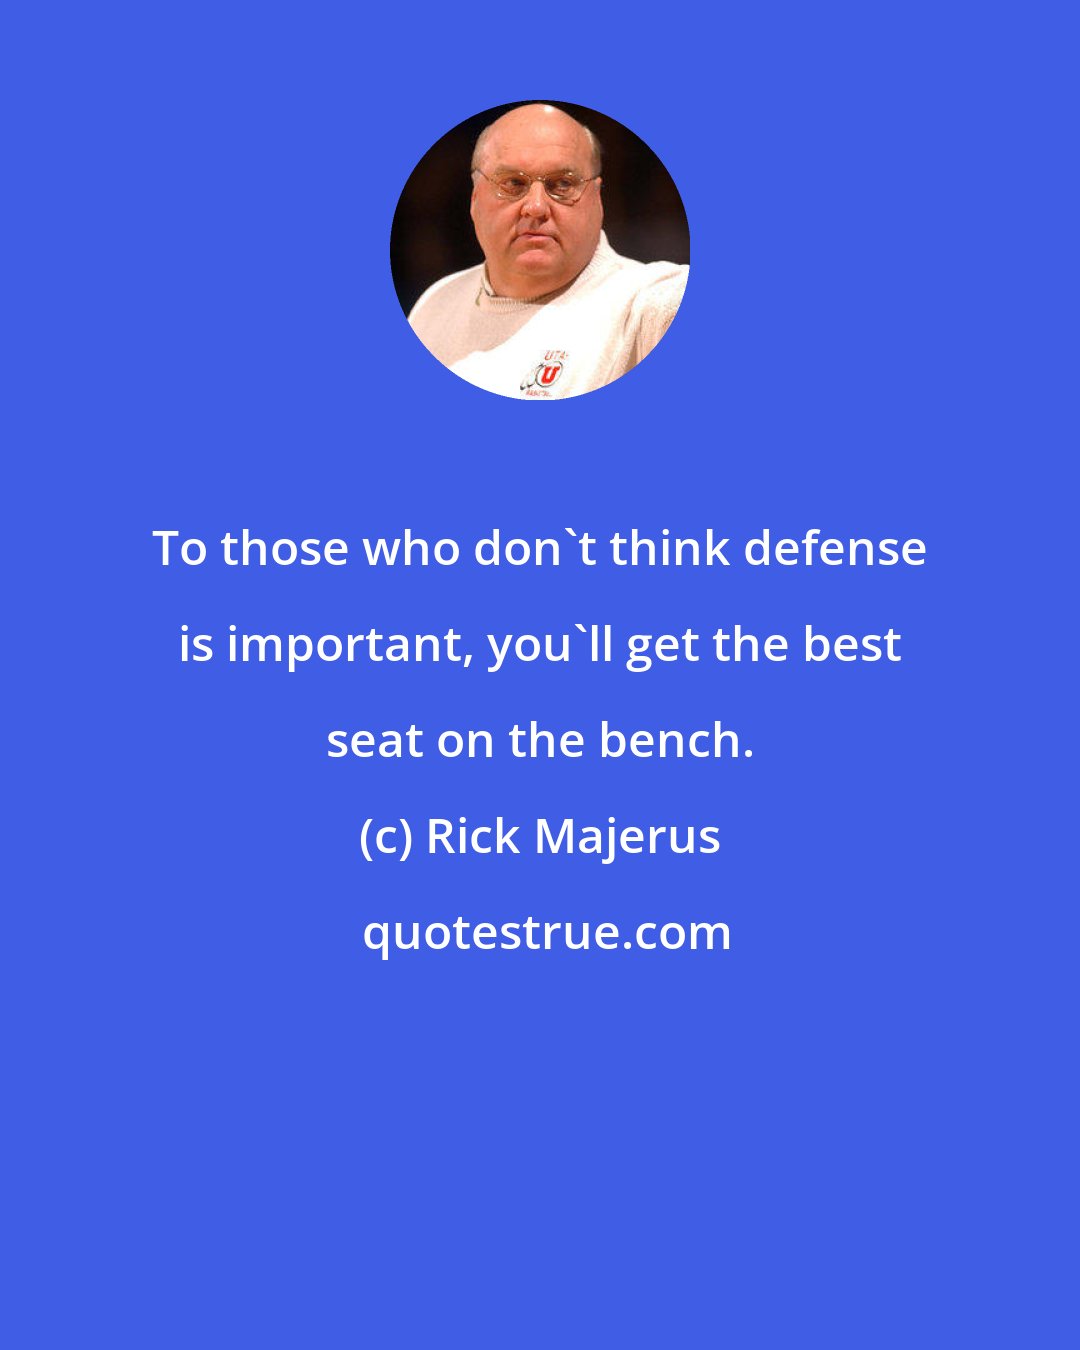 Rick Majerus: To those who don't think defense is important, you'll get the best seat on the bench.